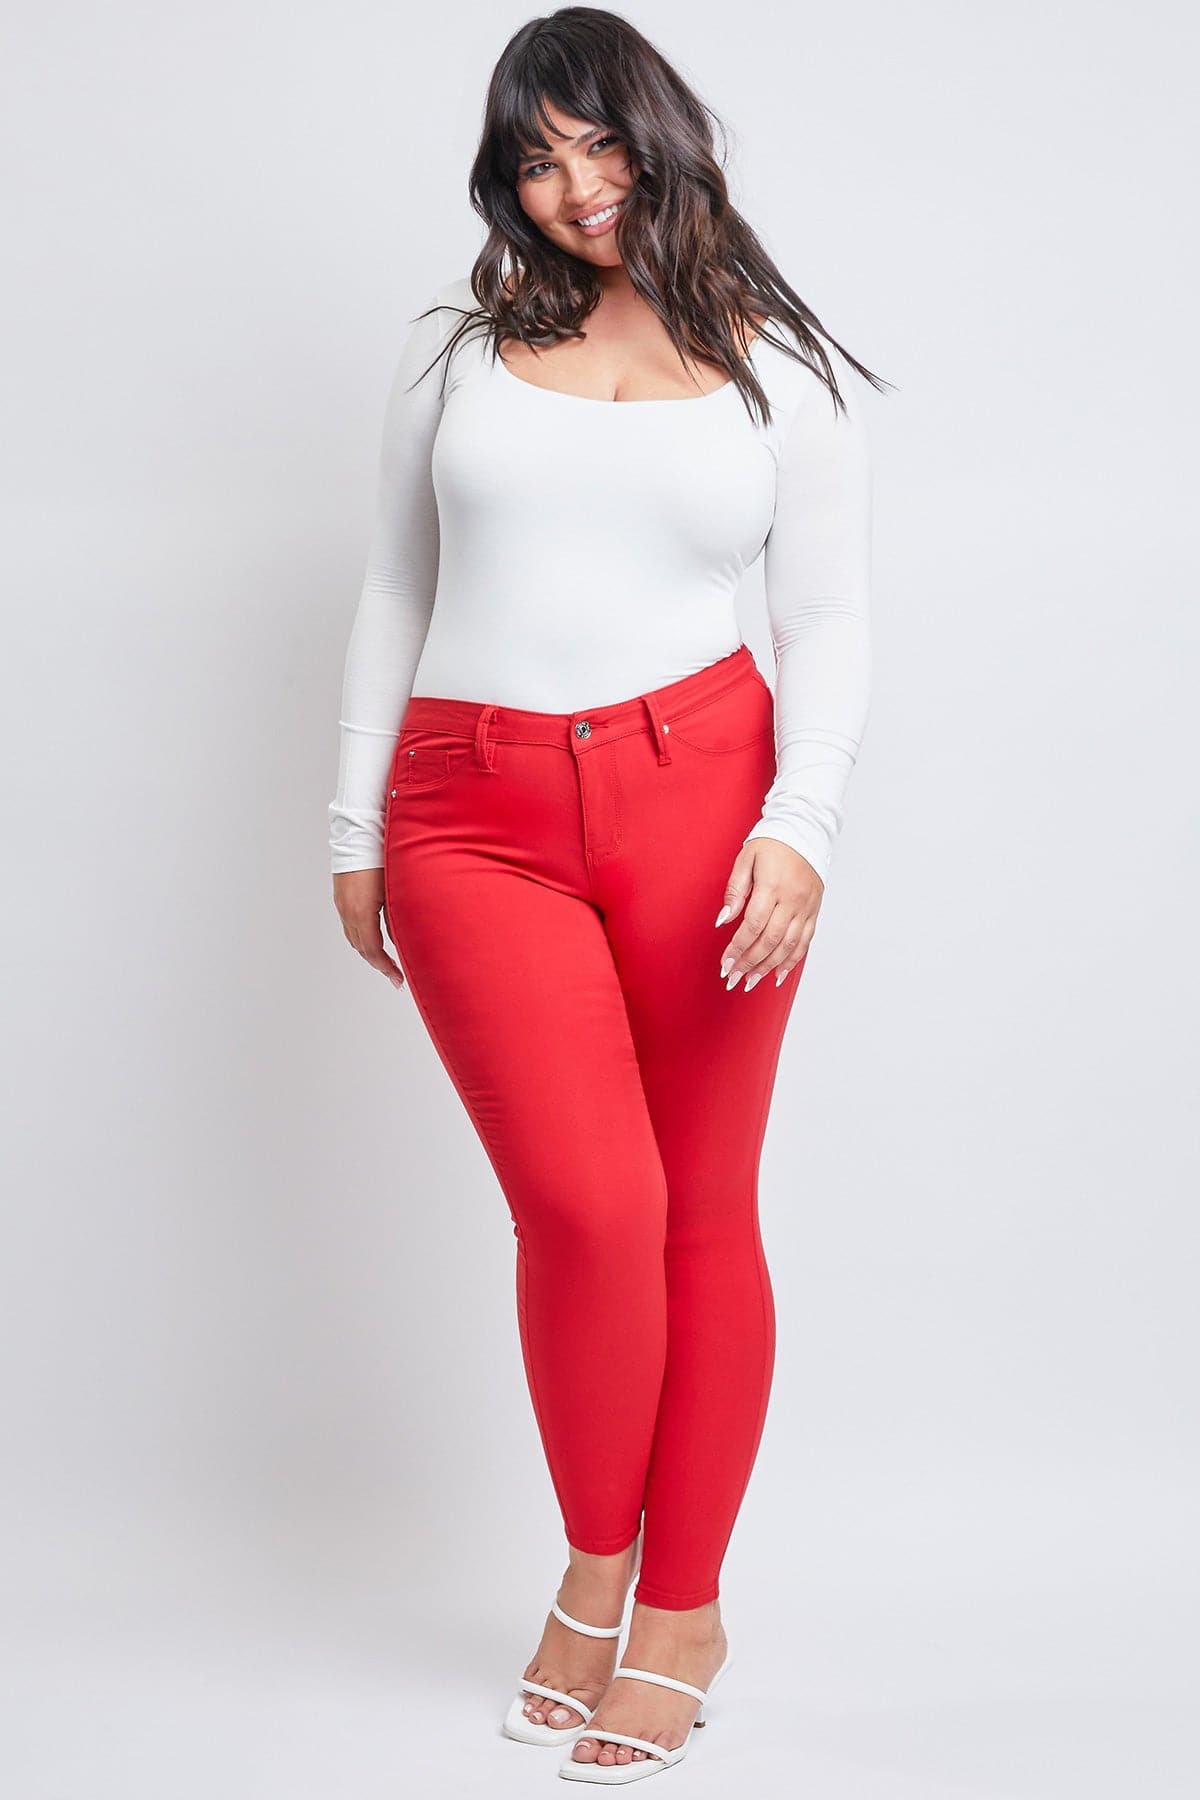 Women's Plus Size Hyperstretch  Forever Color Pants - Bright